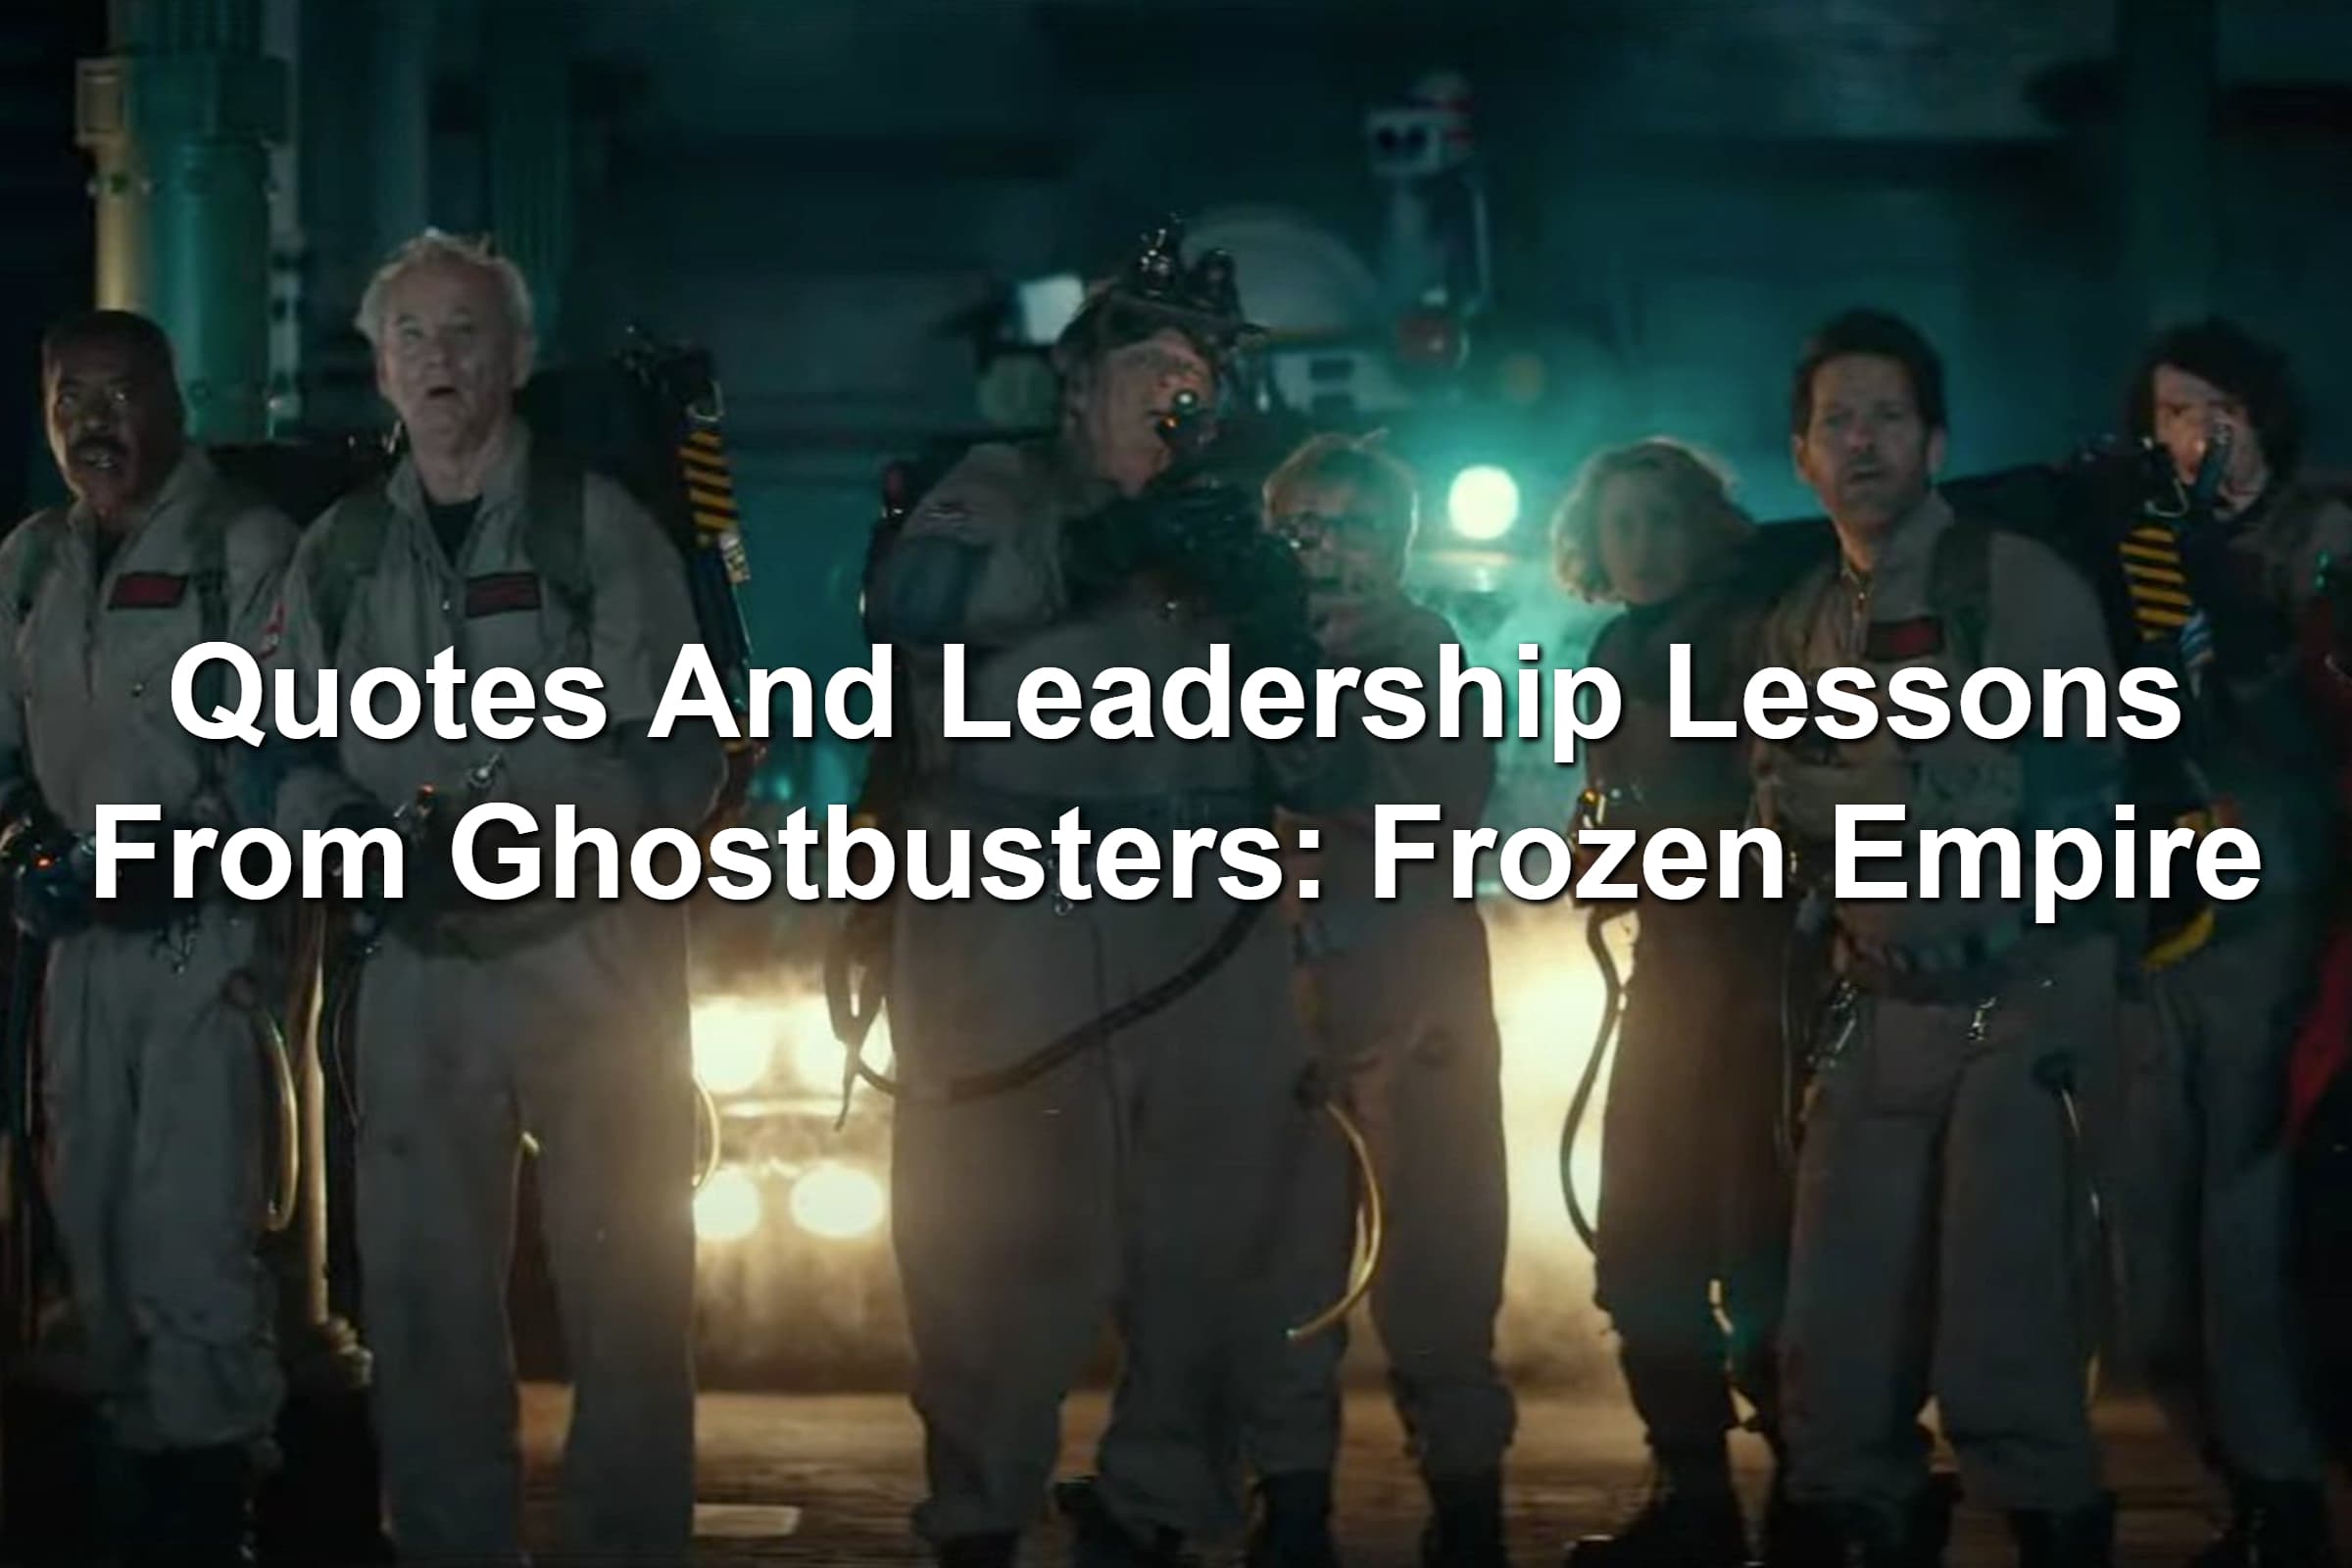 Ghostbusters in jumpsuits with their proton pack blasters ready to shoot